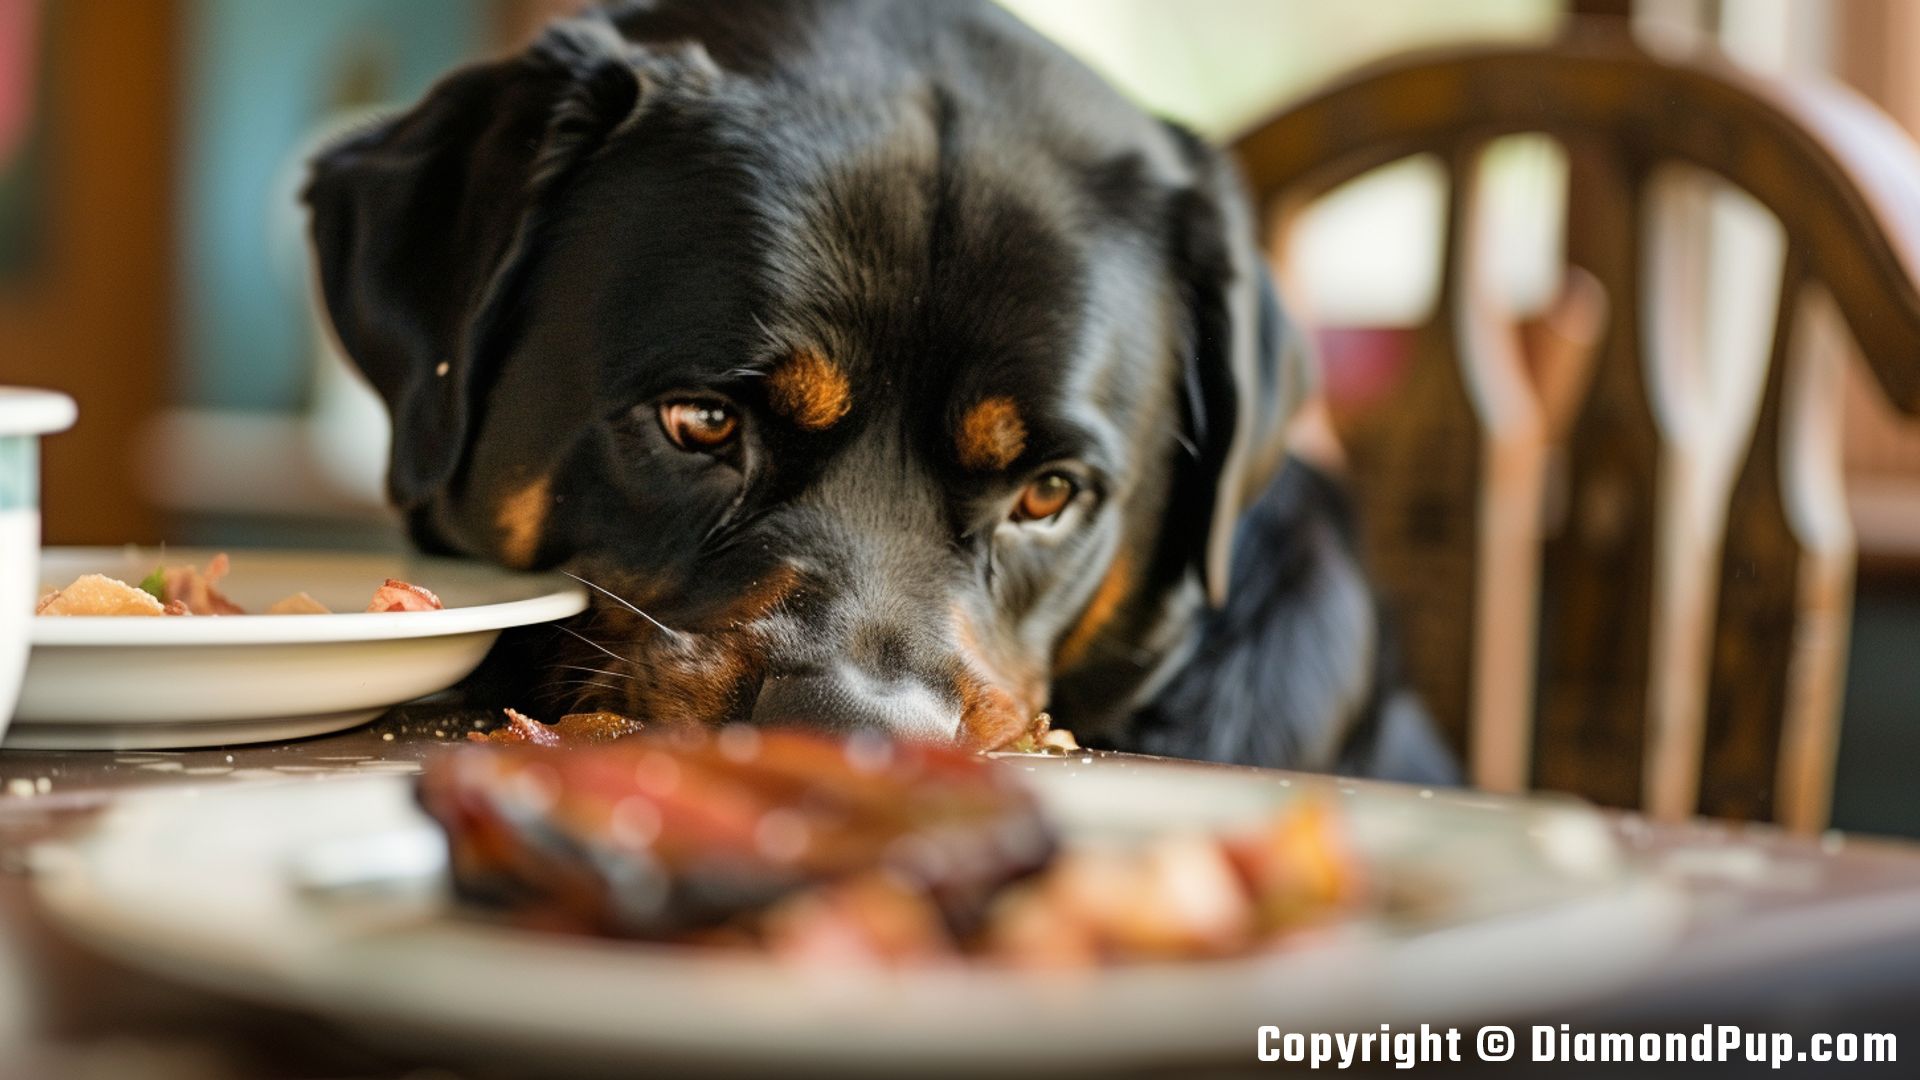 Photograph of a Playful Rottweiler Snacking on Bacon